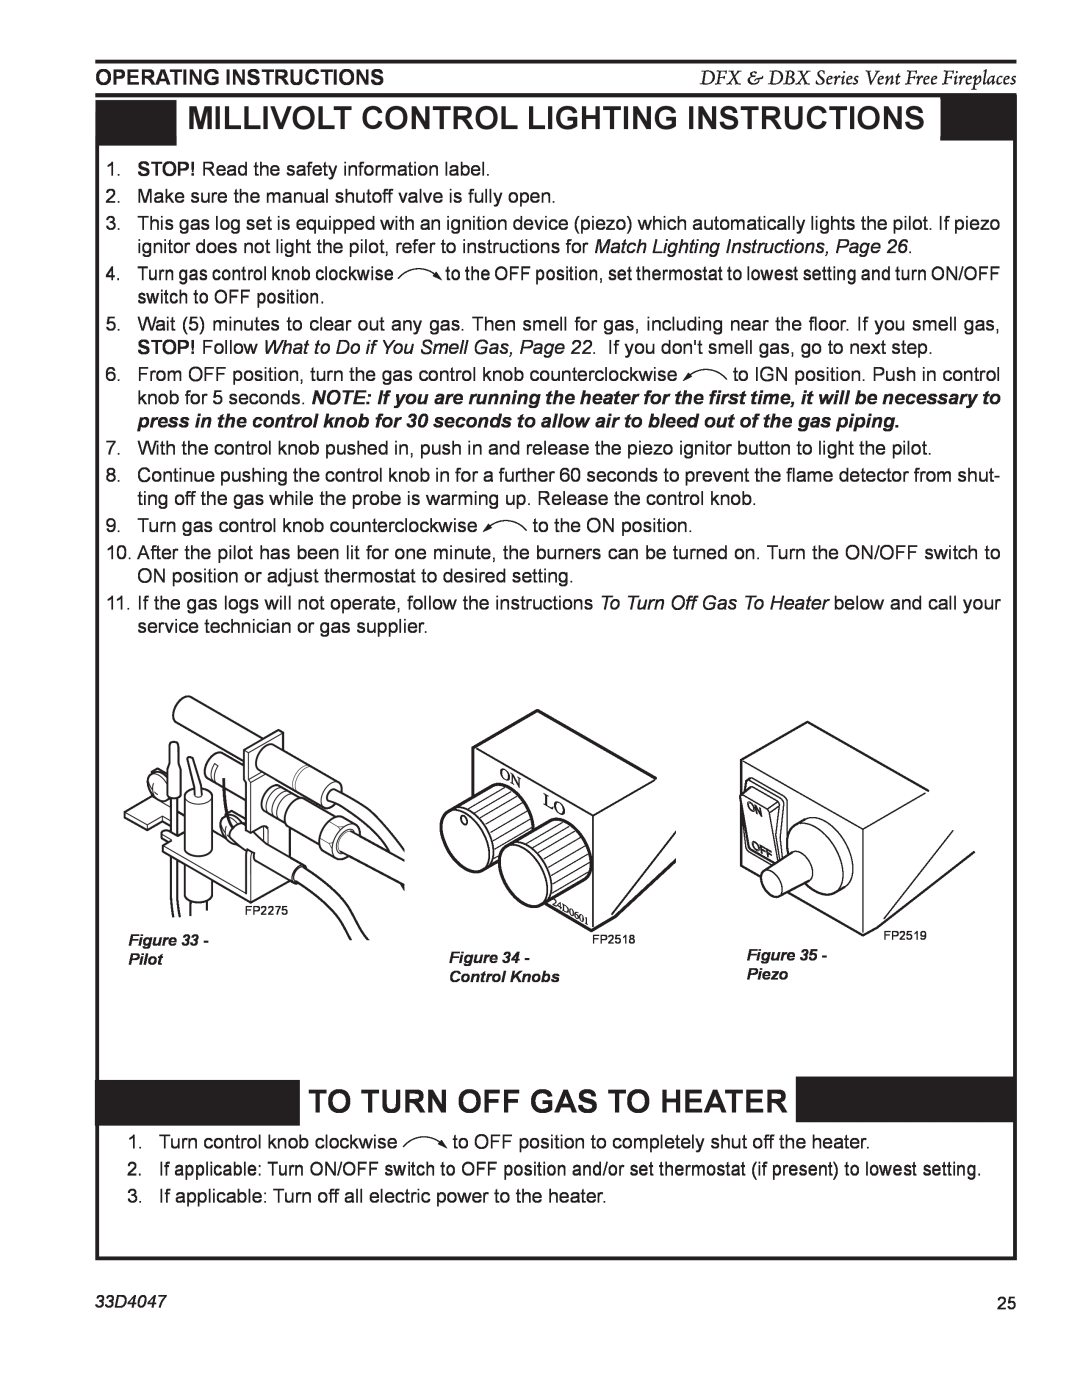 Monessen Hearth DBX24C manual Millivolt control lighting instructions, To Turn Off Gas To Heater, Operating Instructions 